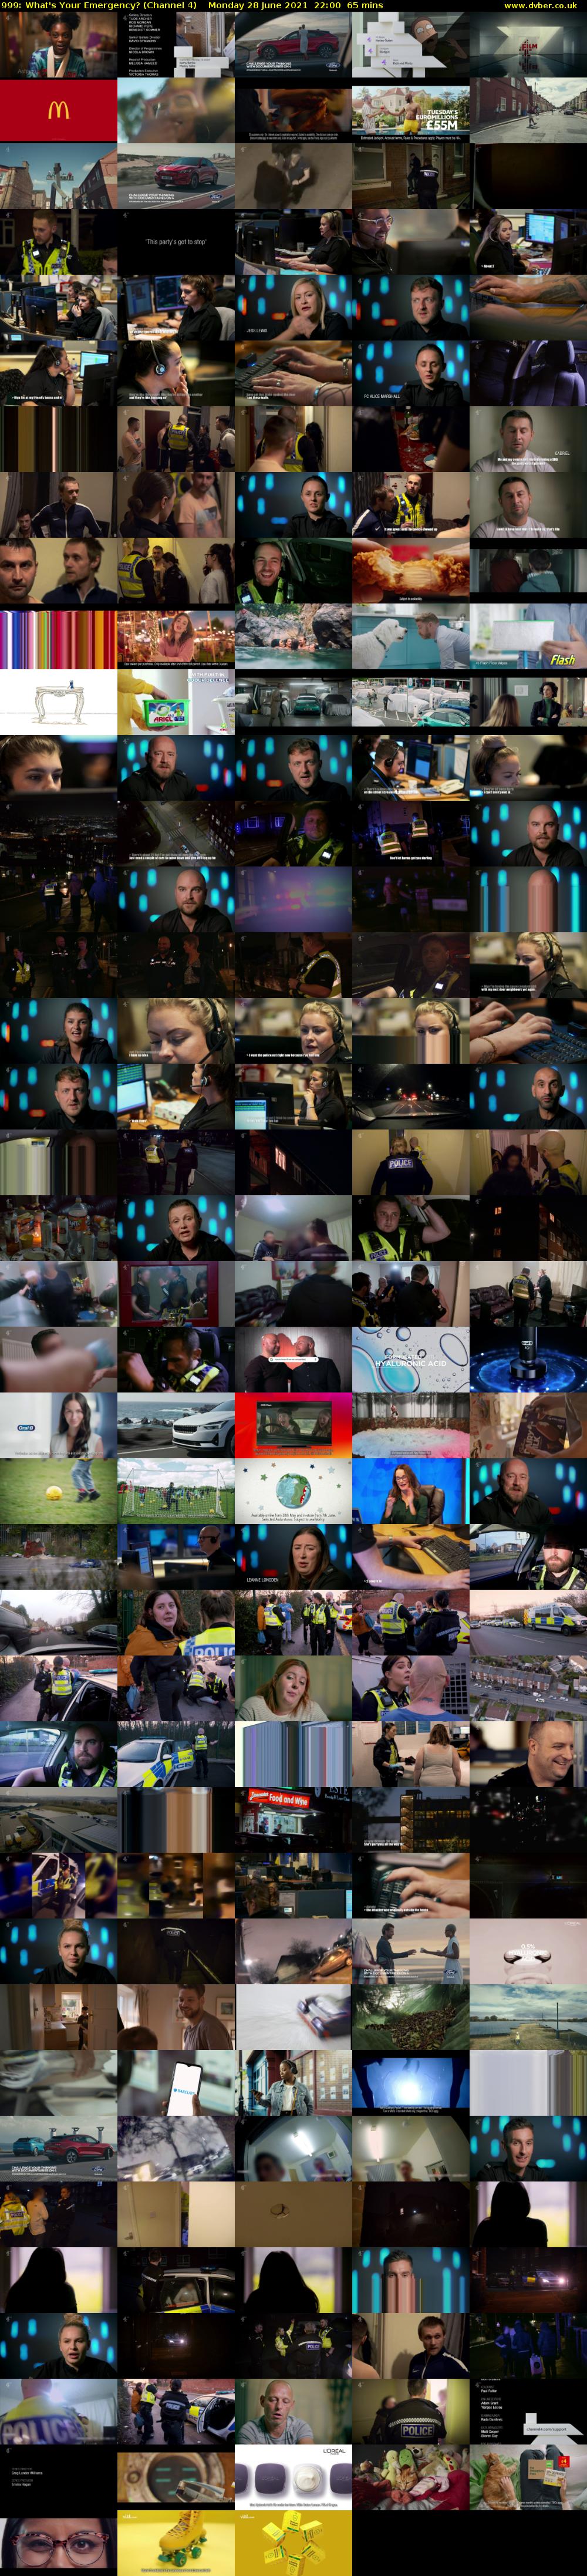 999: What's Your Emergency? (Channel 4) Monday 28 June 2021 22:00 - 23:05